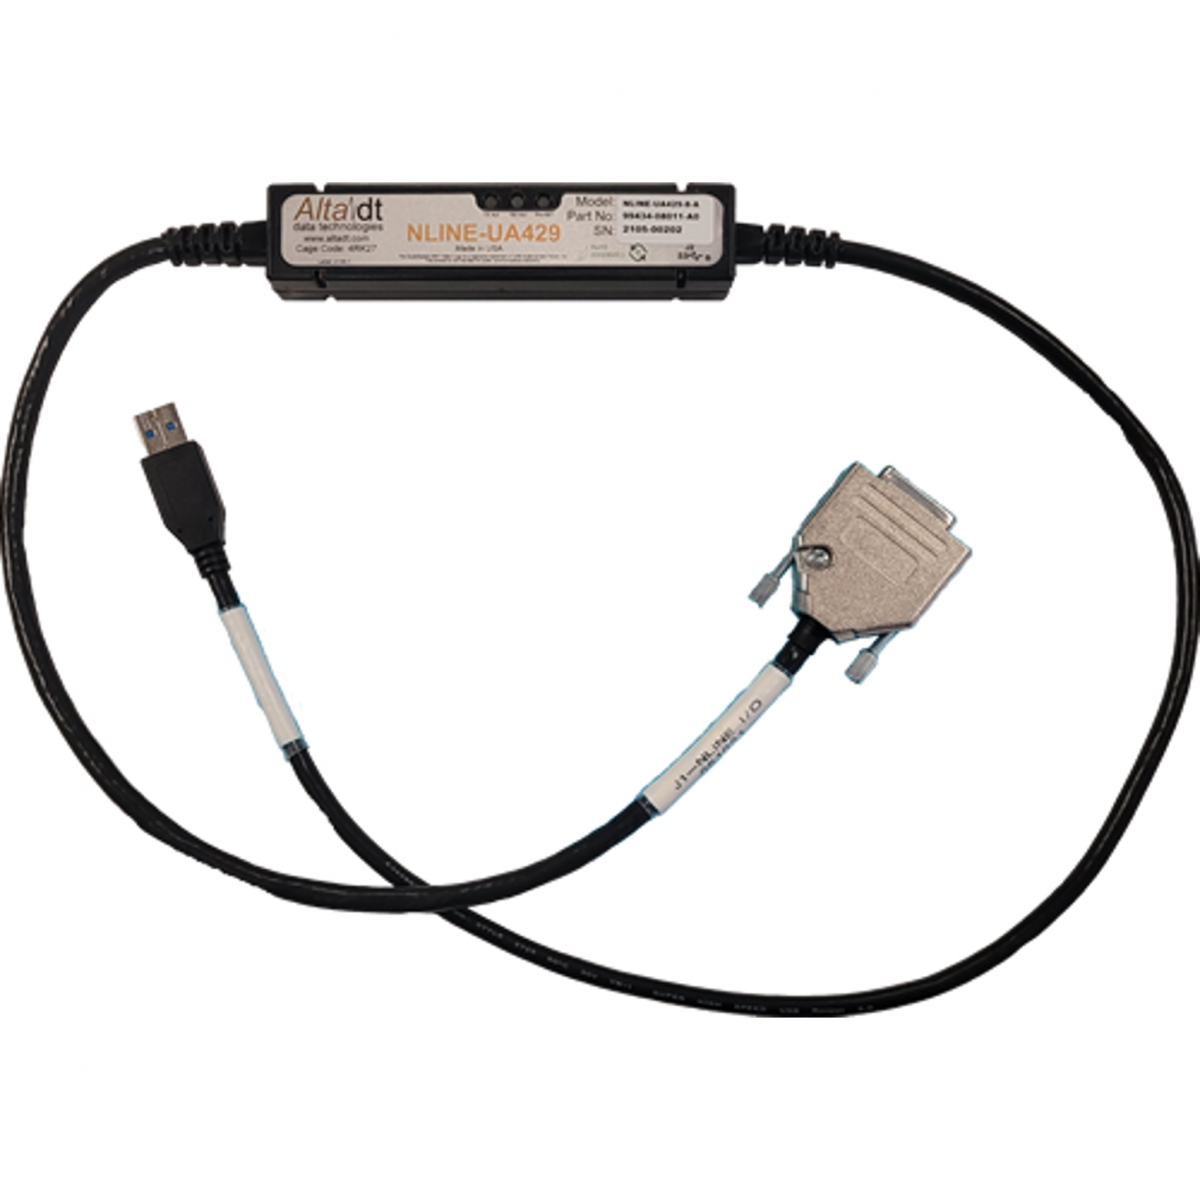 NLINE-UA429 Multi-Channel ARINC Interface Embedded In-Line (NLINE) Cable Assembly